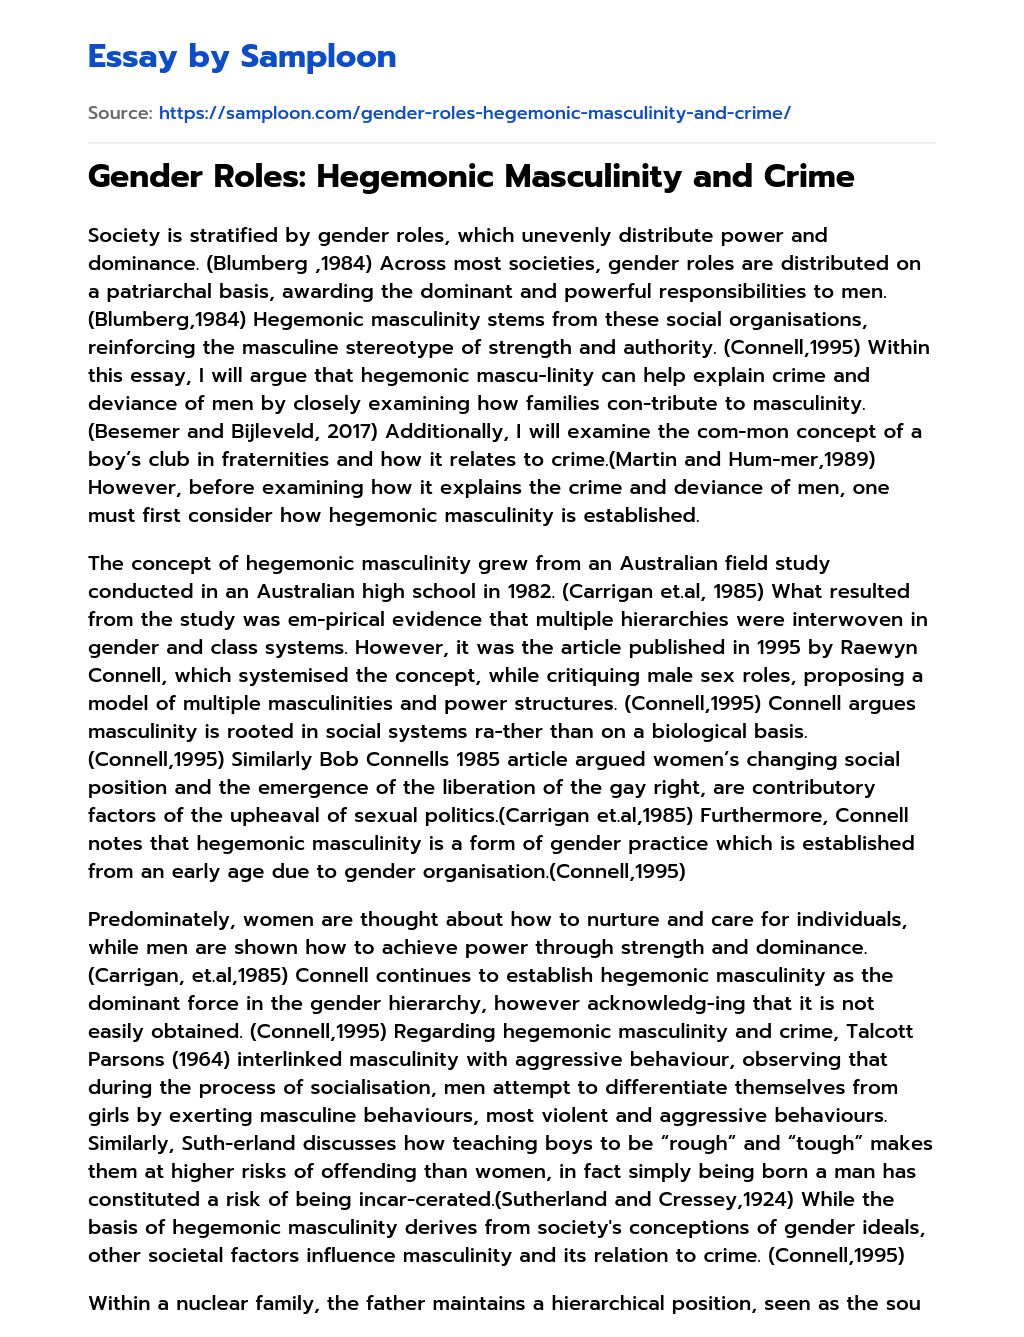 Gender Roles: Hegemonic Masculinity and Crime essay